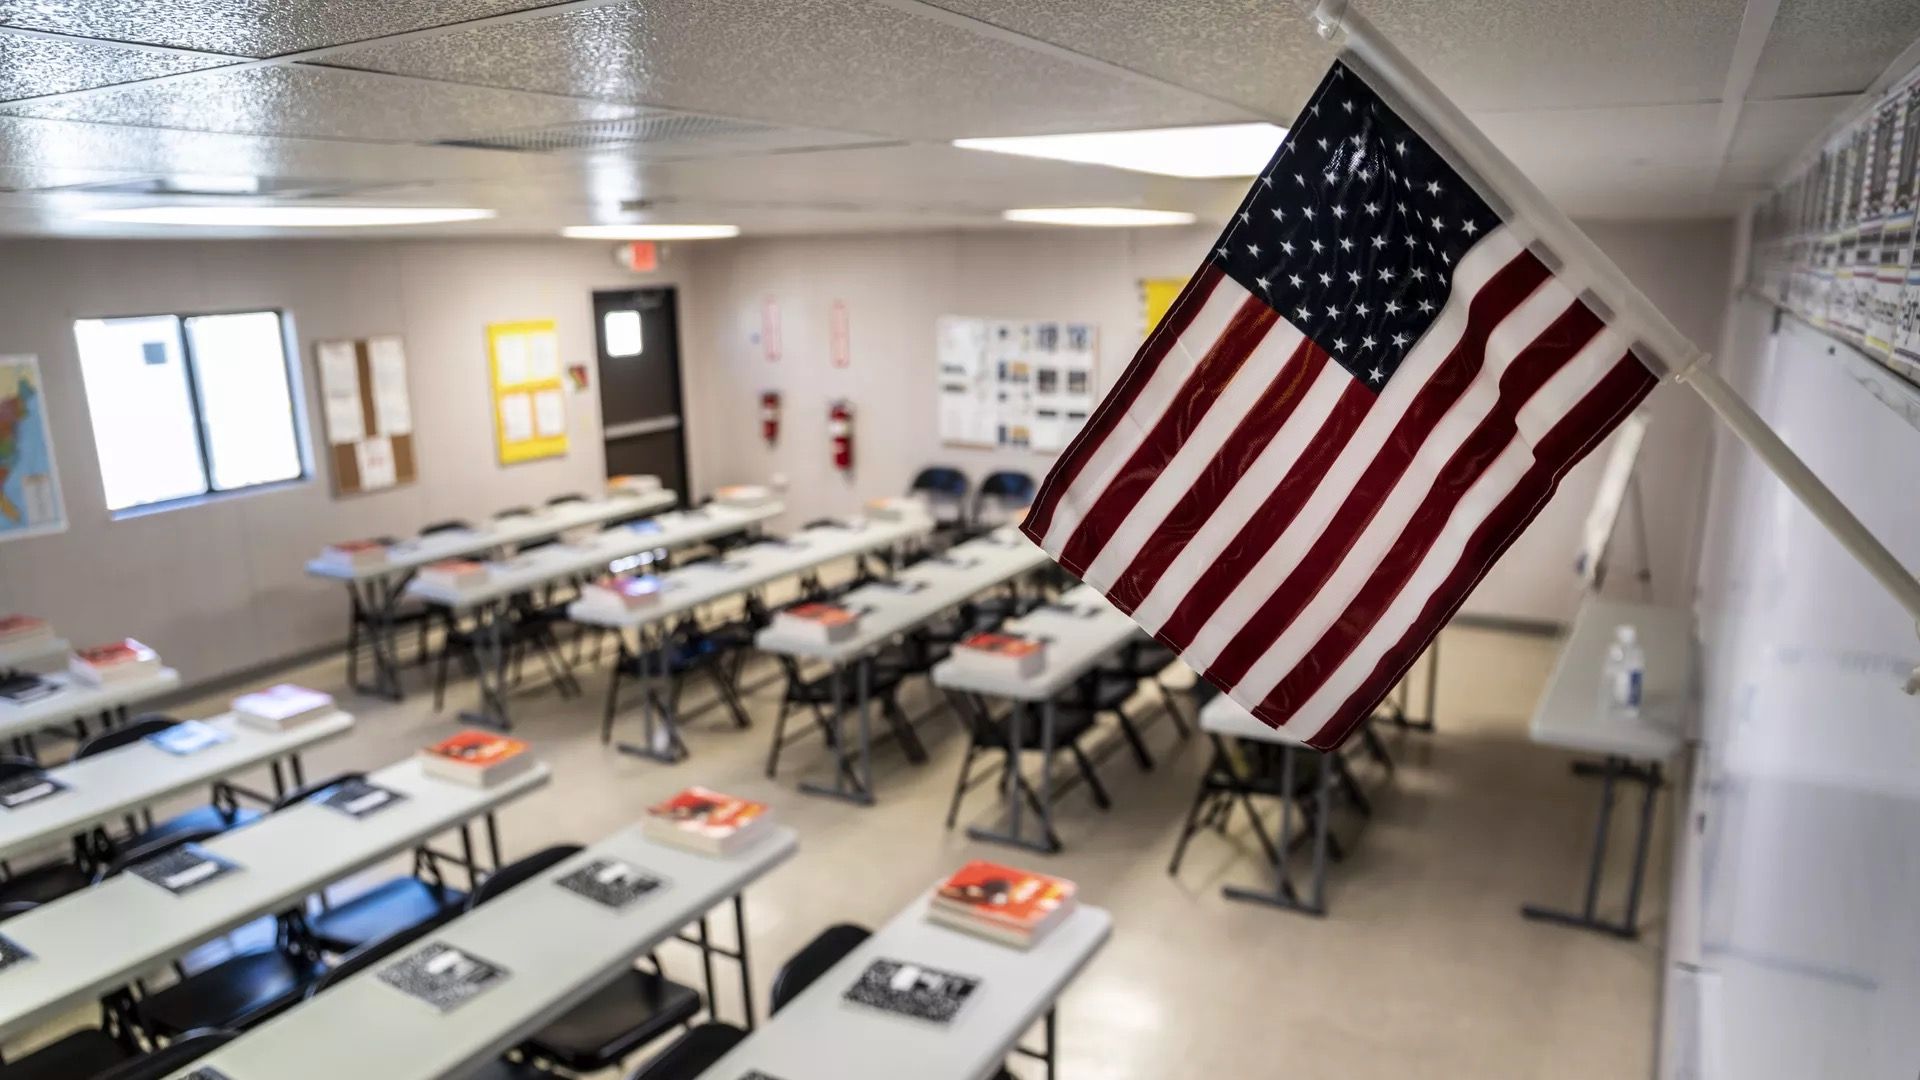 A flag is seen in a classroom used to educate unaccompanied children migrating to the U.S.